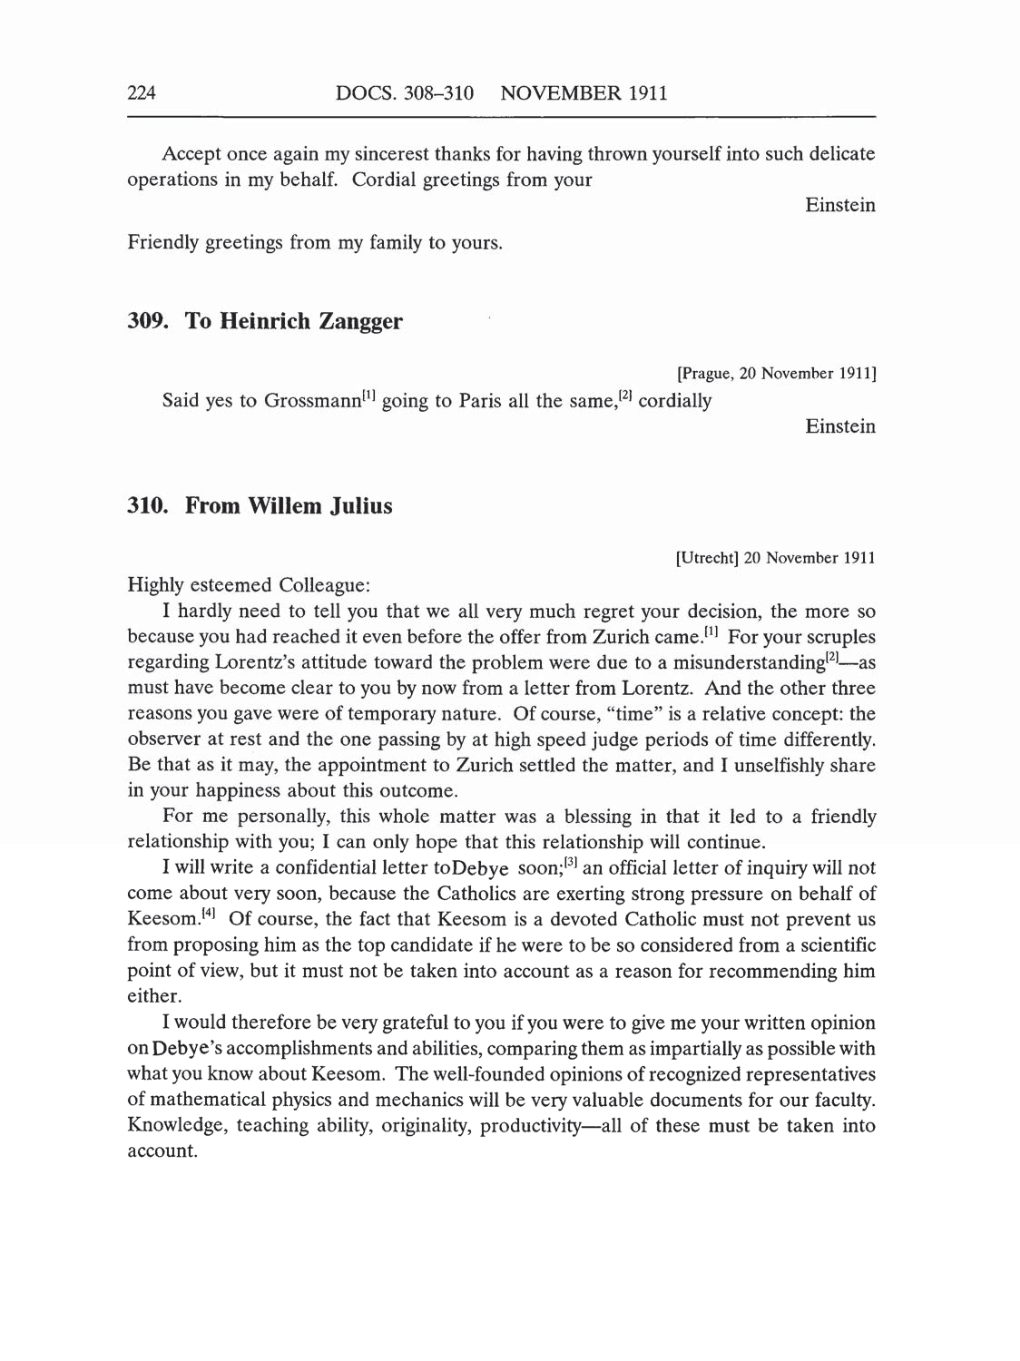 Volume 5: The Swiss Years: Correspondence, 1902-1914 (English translation supplement) page 224